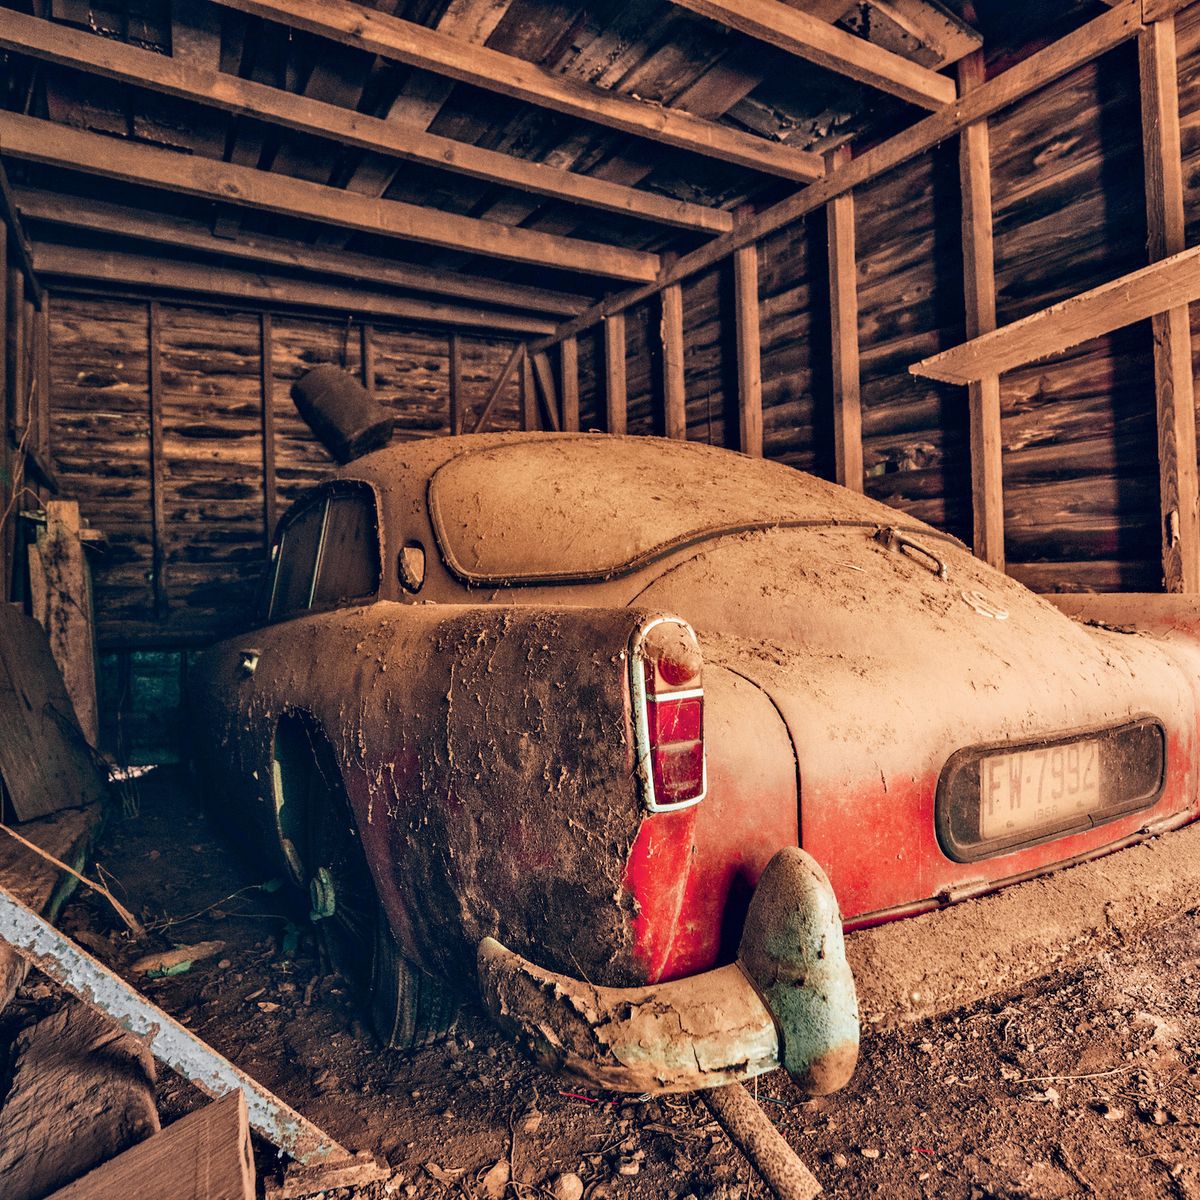 I found a classic Ford hidden inside a barn - now I'm set to sell